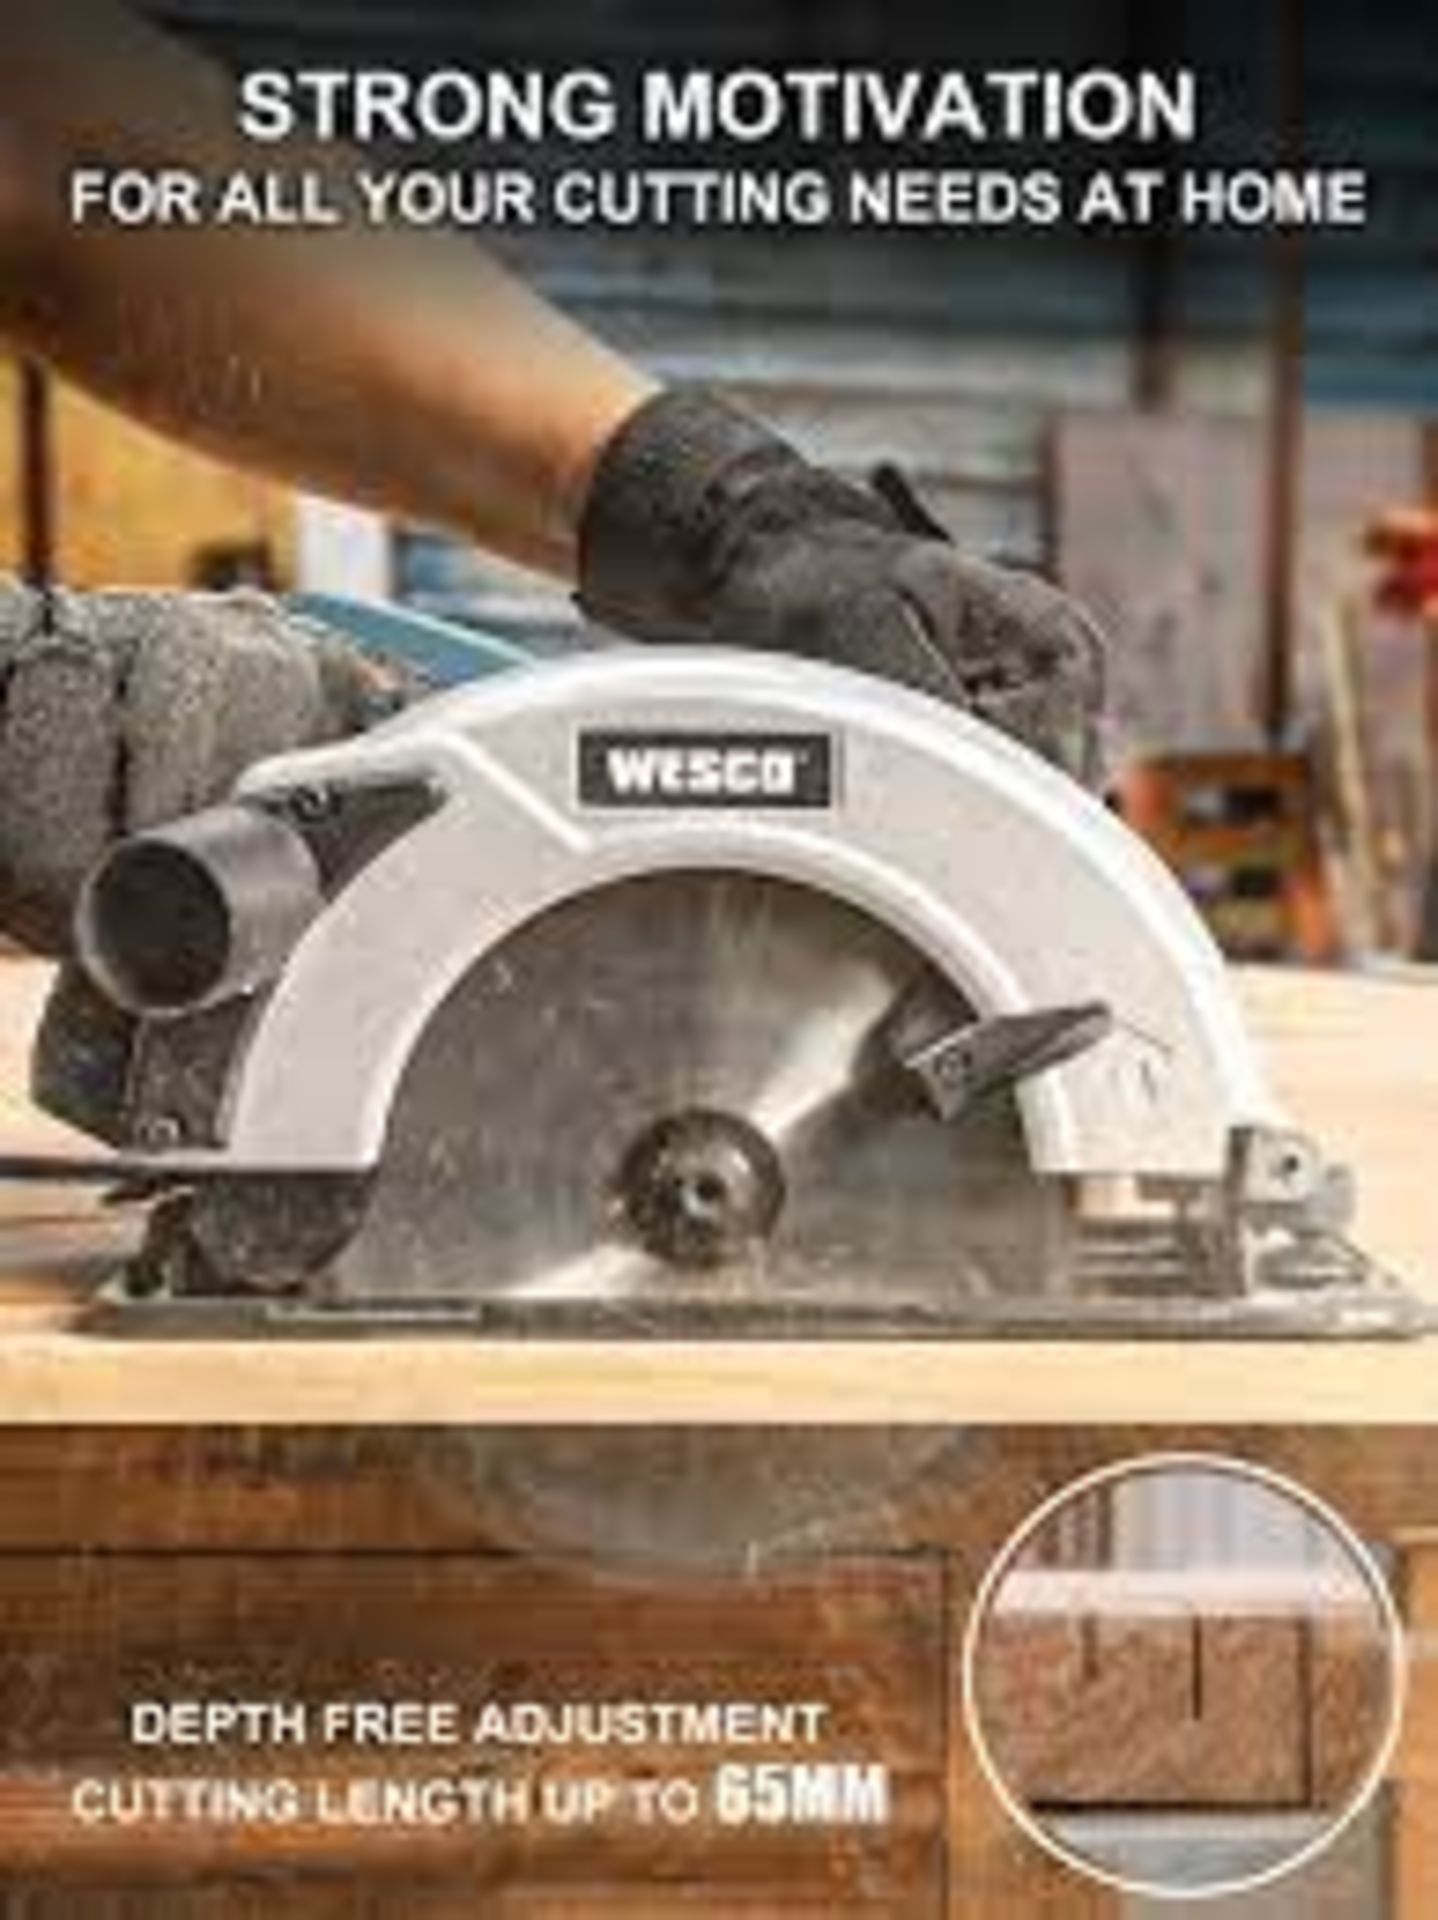 PALLET TO CONTAIN 24 x New & Boxed WESCO Circular Saw 1400W 5800 RPM Skill Saw. Cutting Depth: - Image 2 of 2